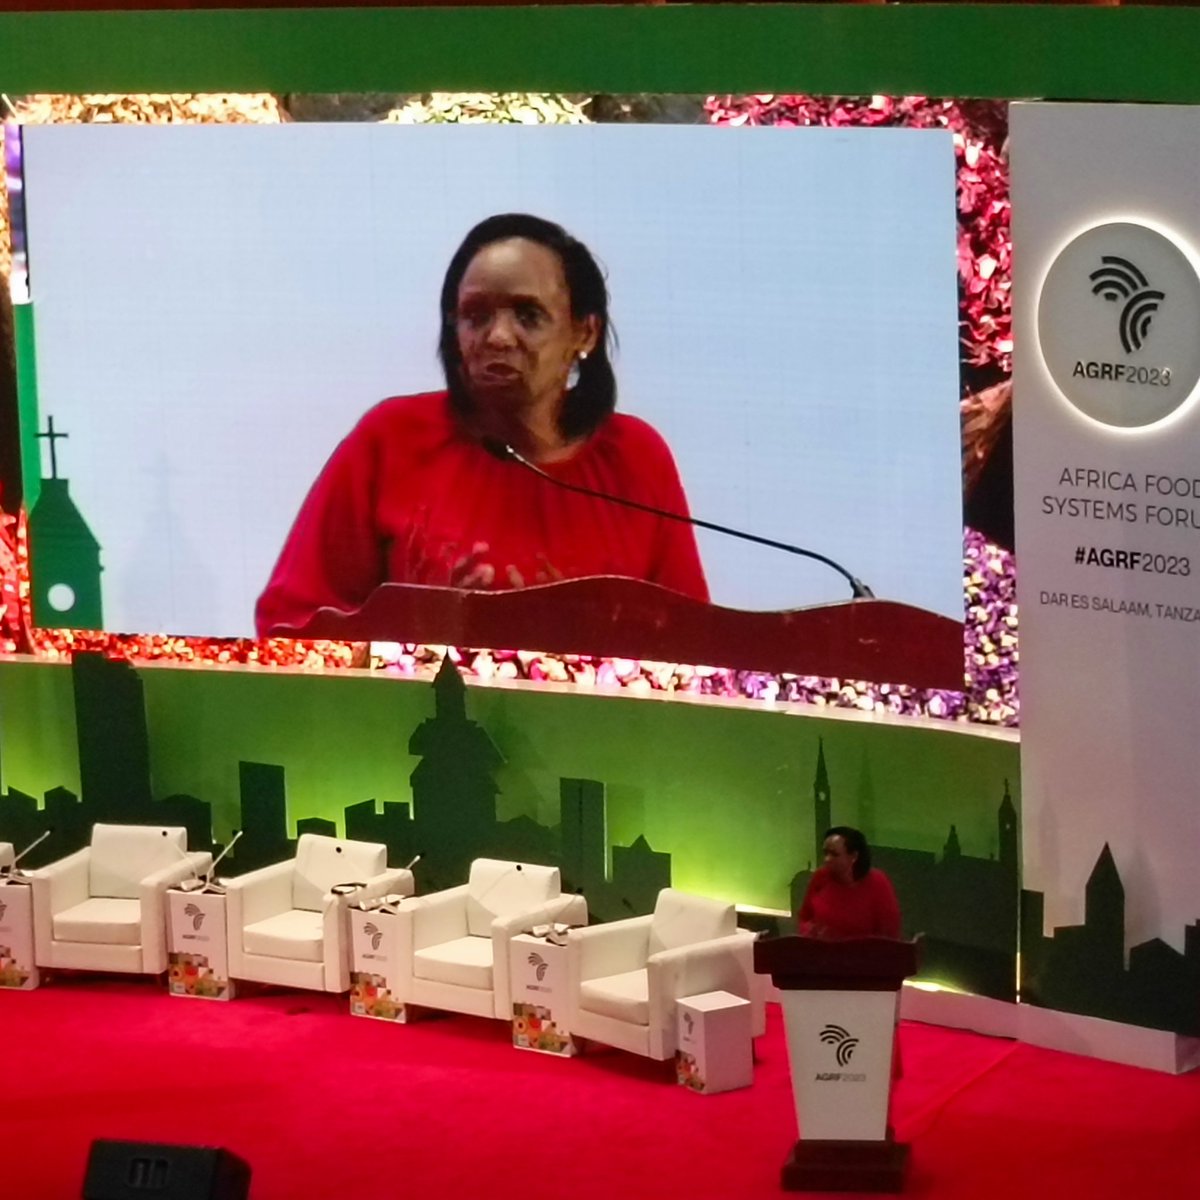 2023 #AGRF2023 is the biggest ever, bringing together over 5000 participants from over 70 countries with over 350 renowned speakers ranging from farmer communities, civil society, academia and governments. @AGRA_Africa @Andebes